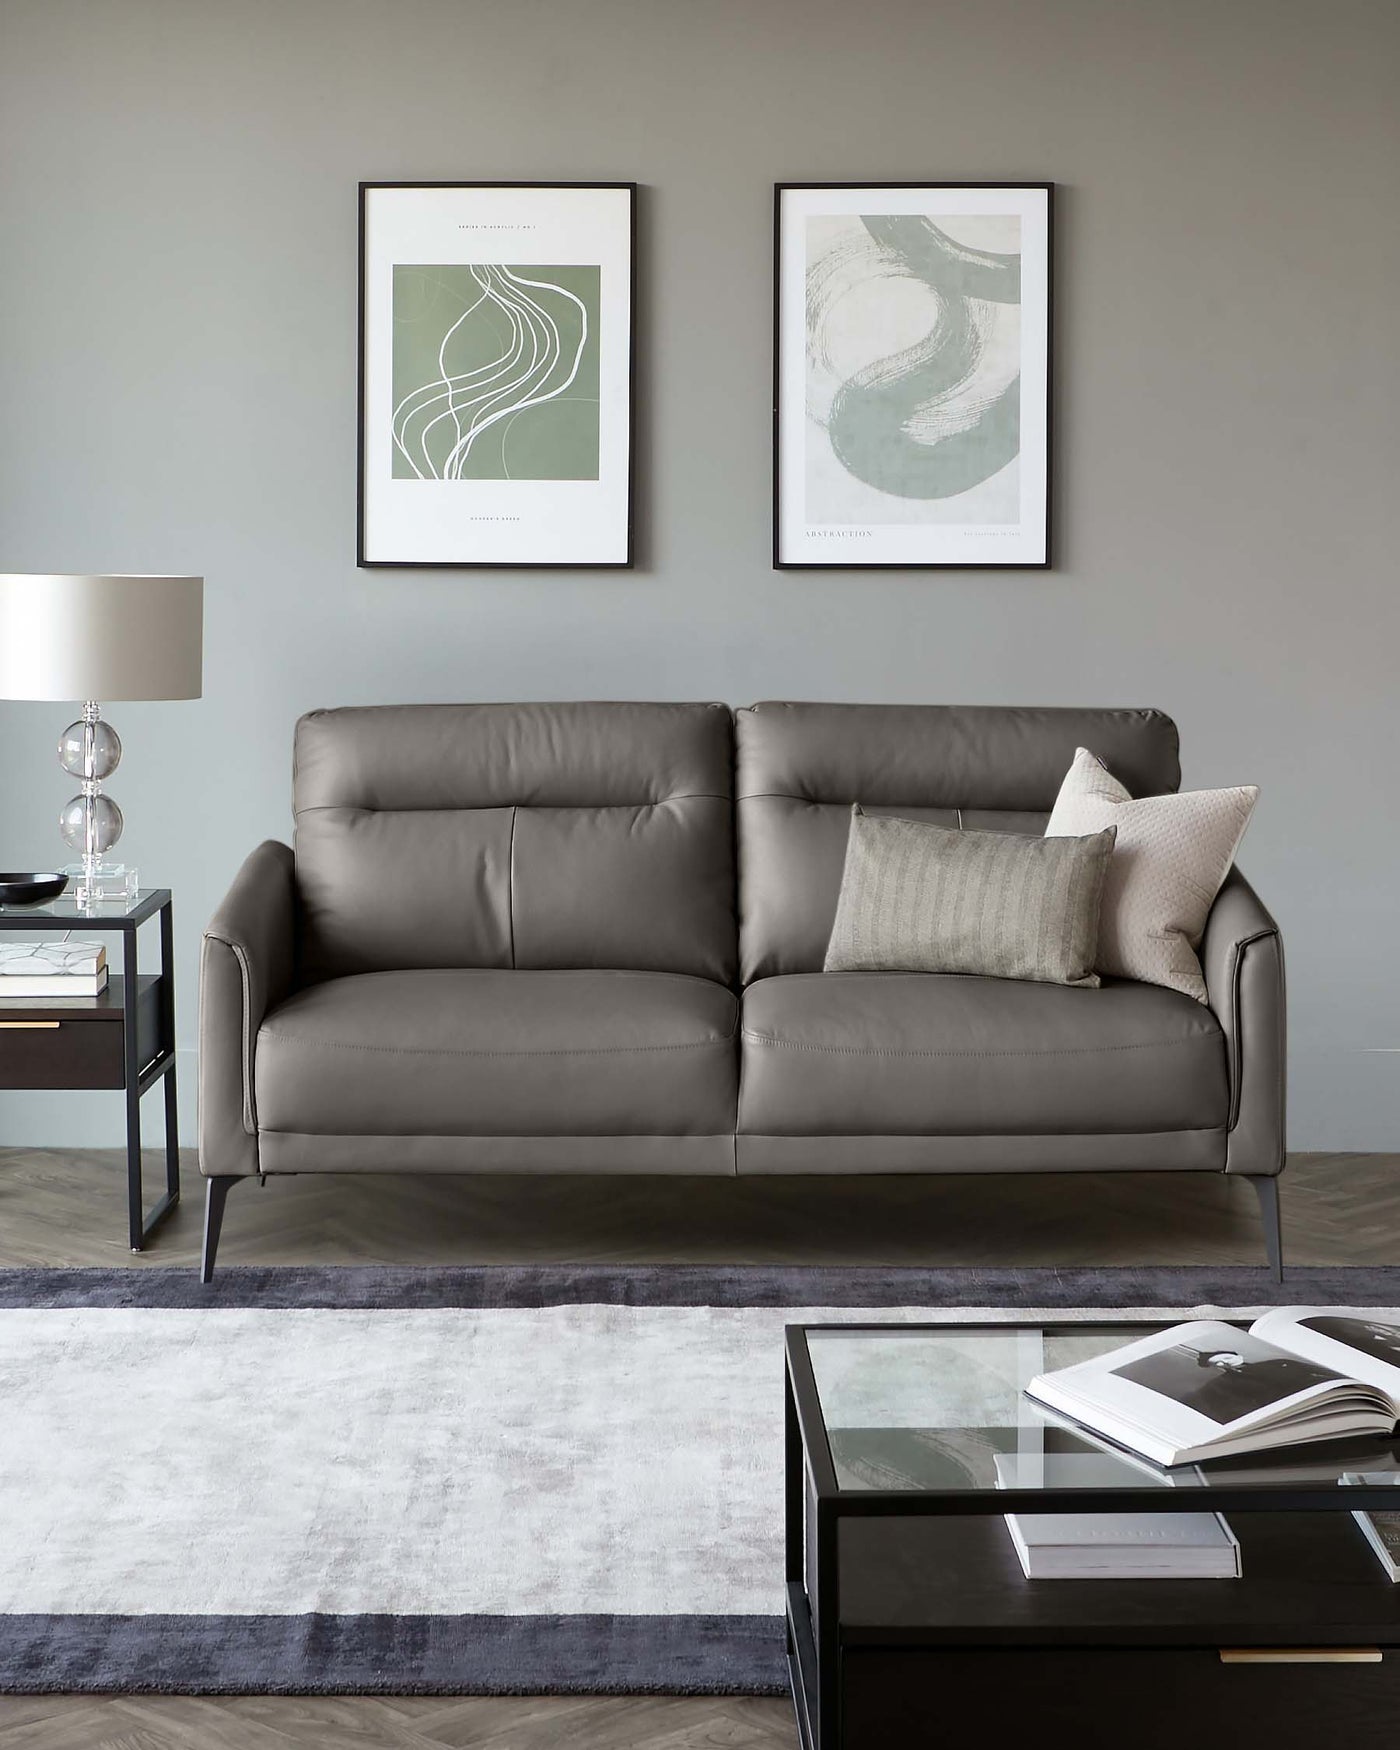 Three-seat leather sofa in a modern design with sleek metal legs, complemented by minimalist side and coffee tables with glass tops and metal frames, accented with a contemporary table lamp, all staged on a two-tone area rug.